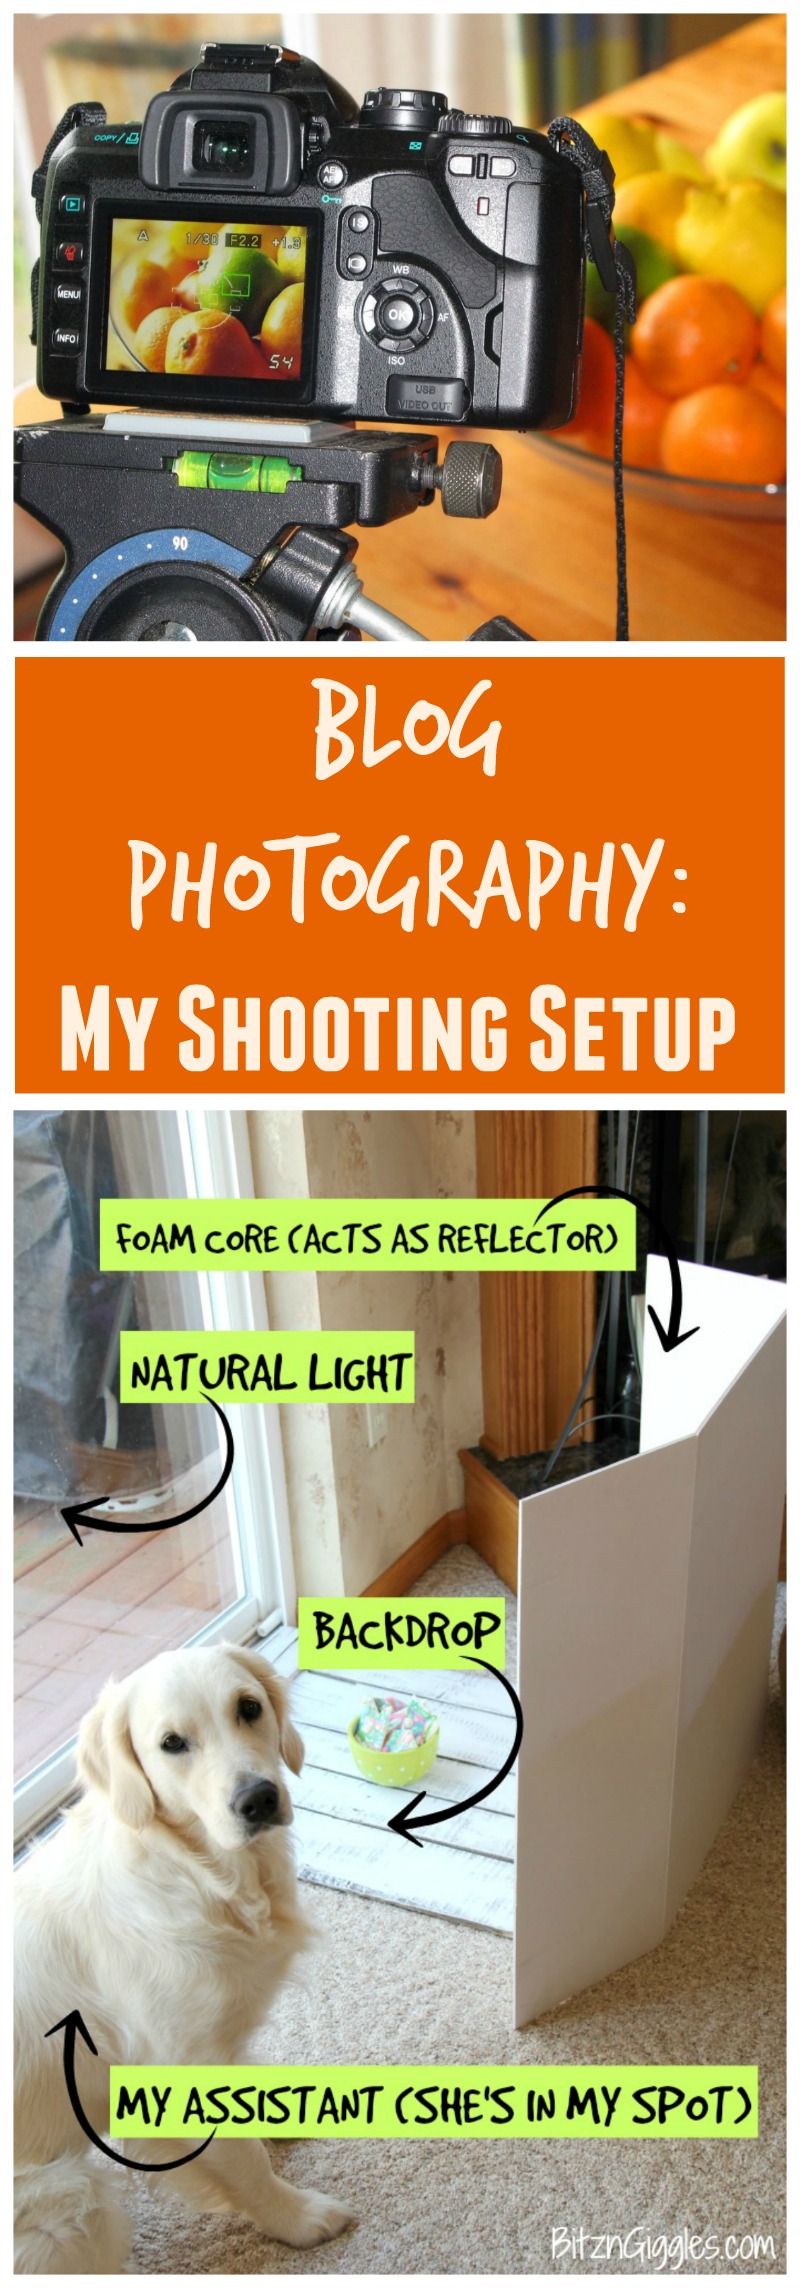 Blog Photography: My Shooting Setup - A behind-the-scenes look at how I shoot photos for my blog - my photography set-up, info on my camera and some of my favorite accessories!